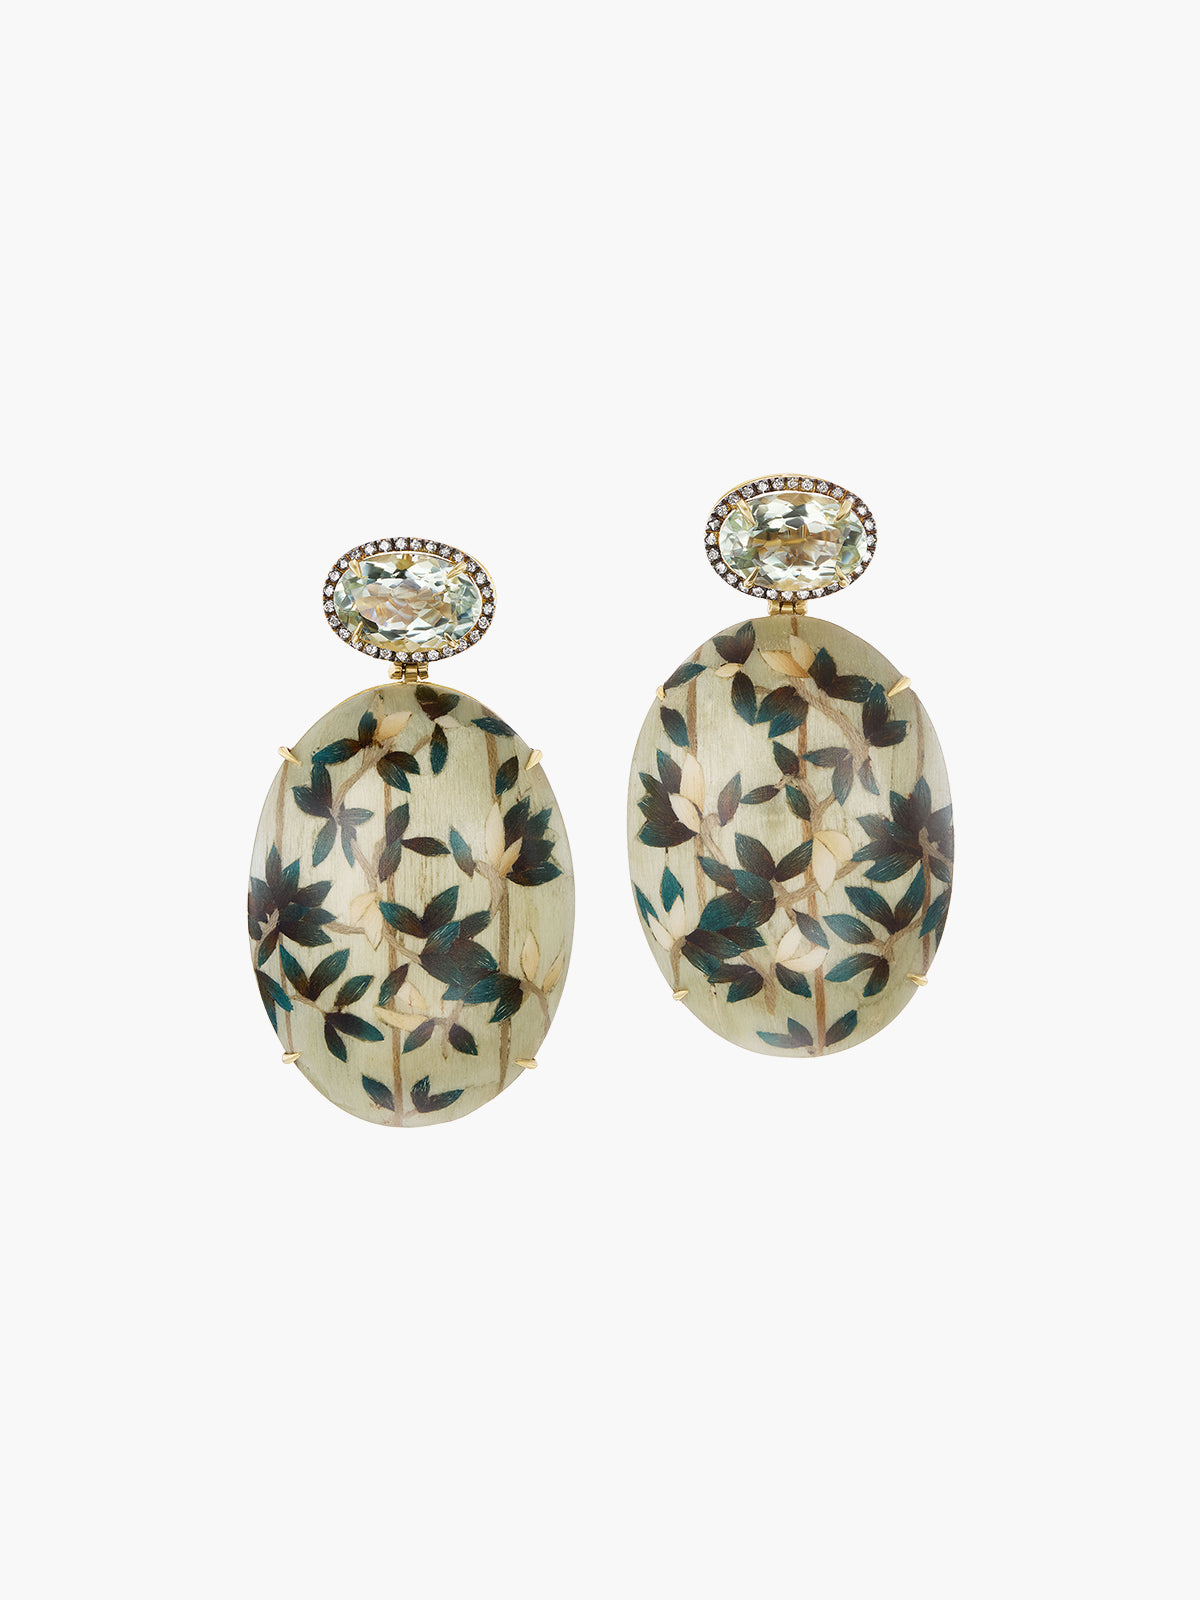 Oval Marquetry Earrings | Mangrove Leaf with Praisolite & Diamonds